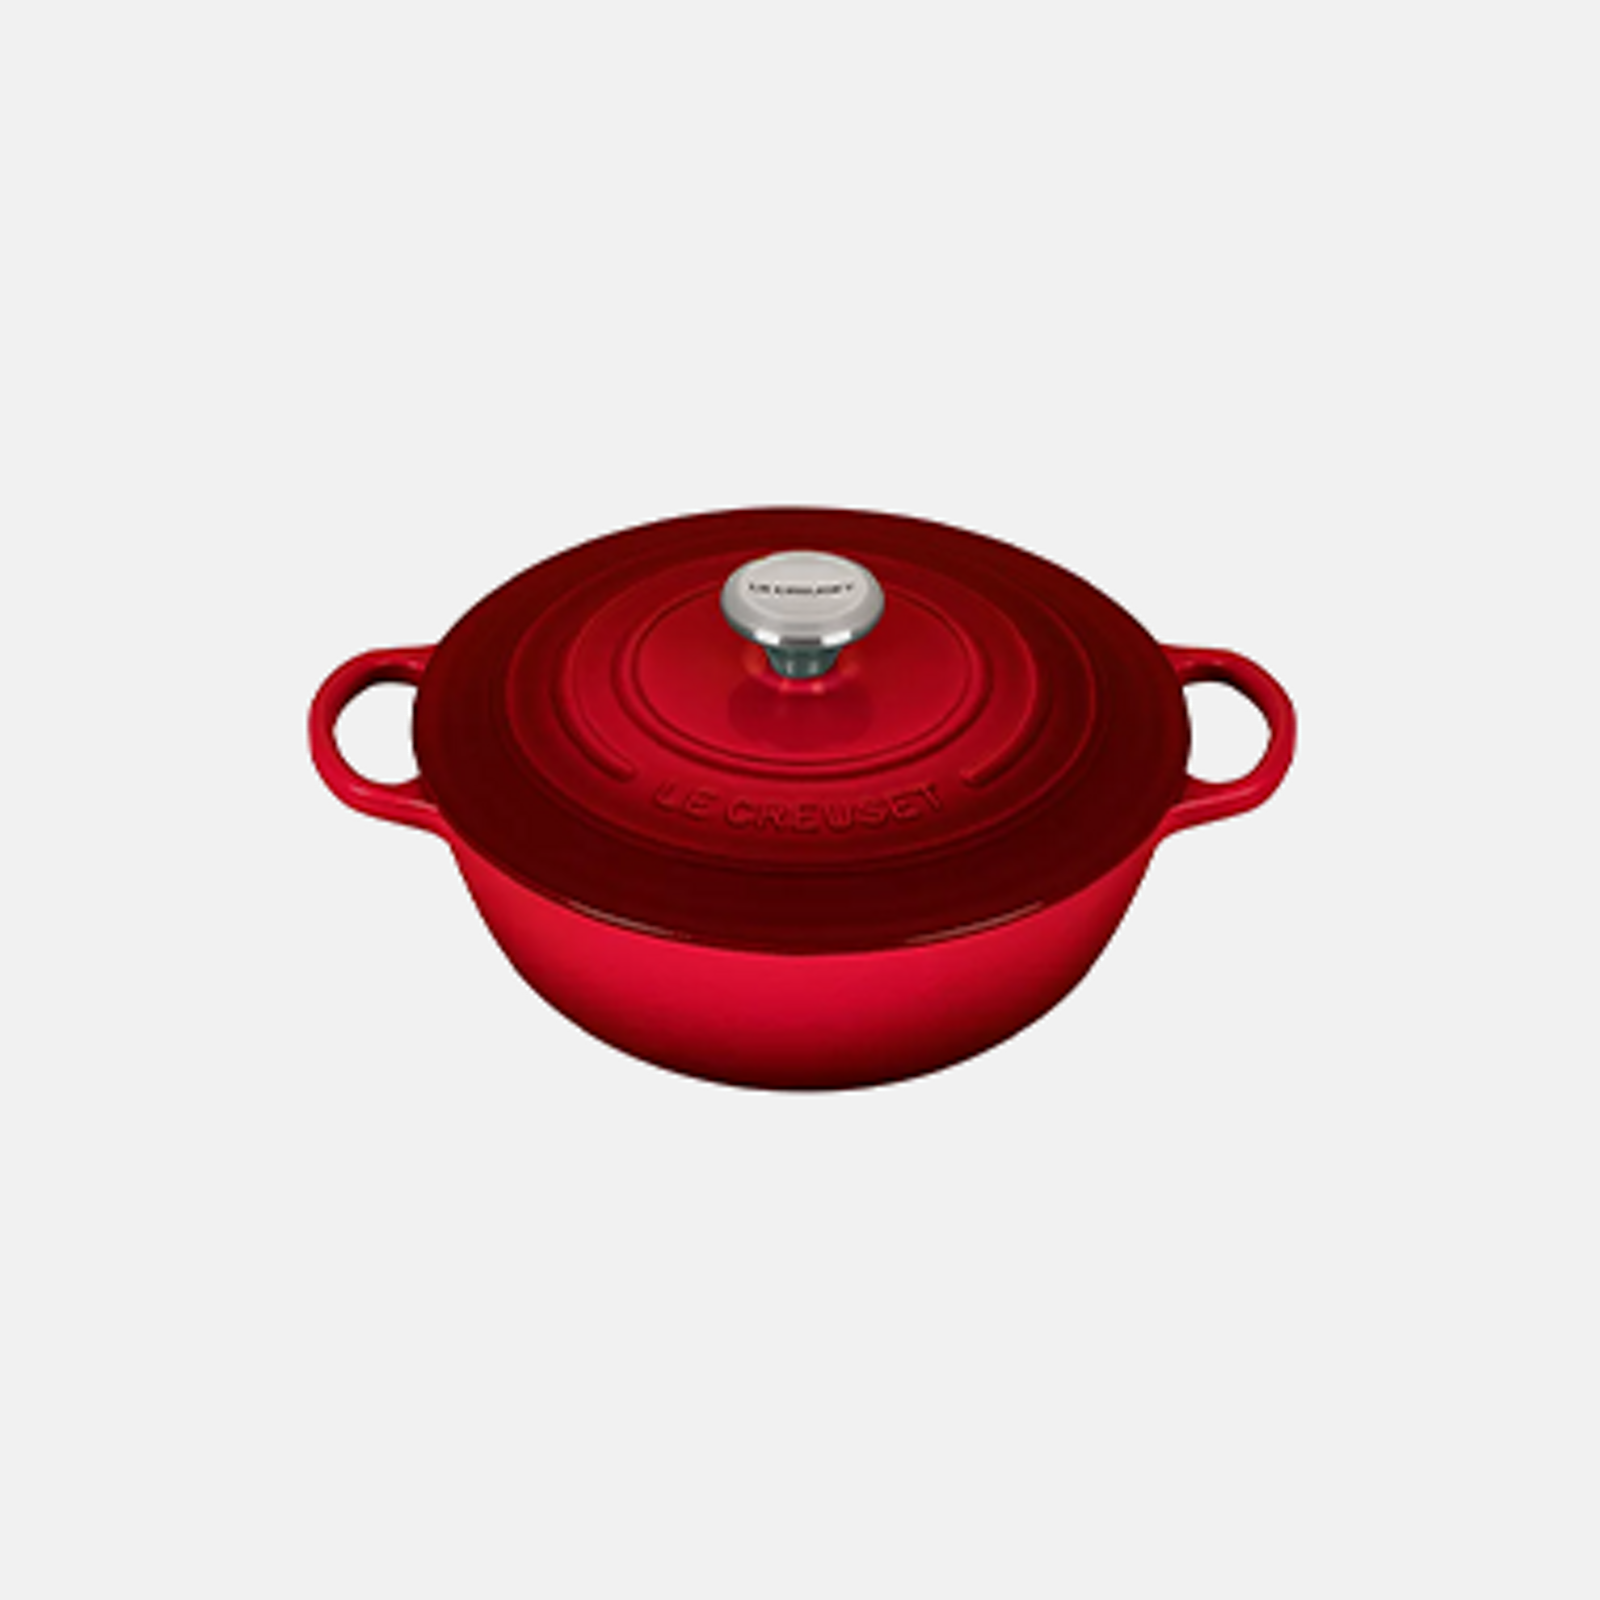 Cookware On Sale & Clearance - Macy's